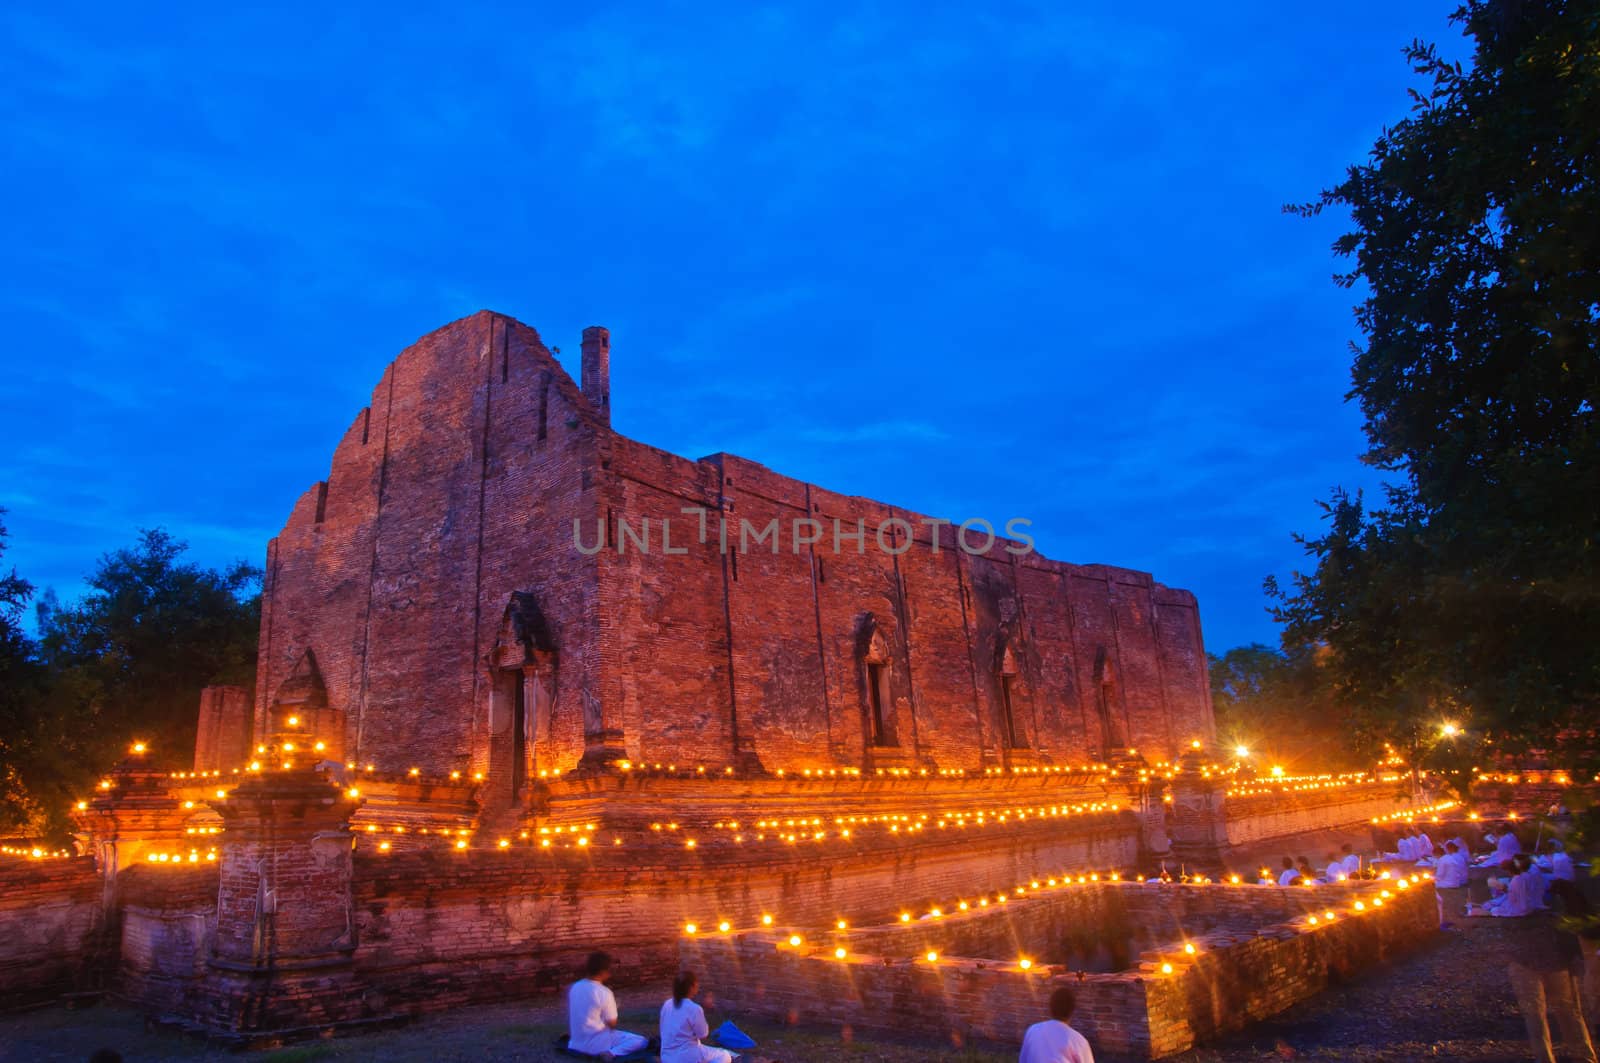 The ruins of the temple in twilight time at Ma Hae Yong temple, Thailand